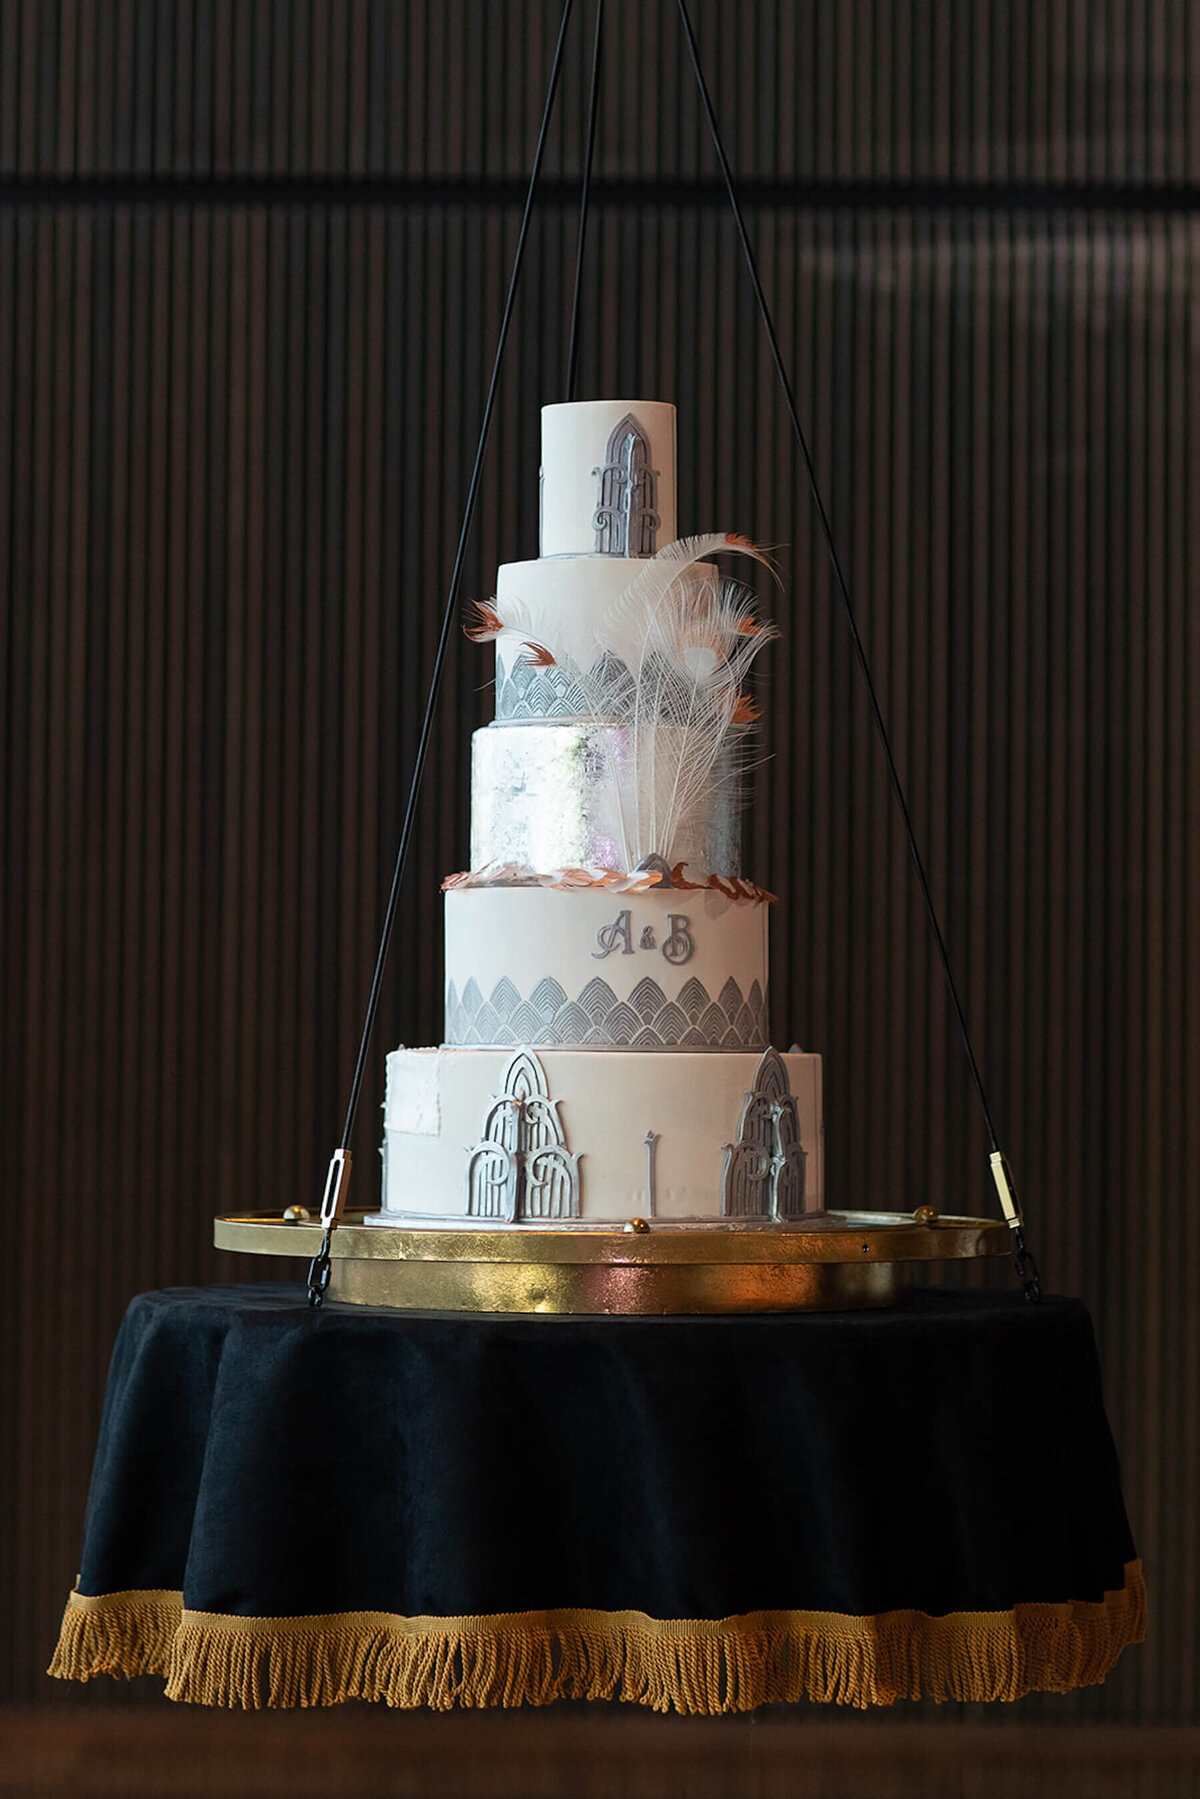 Art decor wedding cake hanging and descending from ceiling